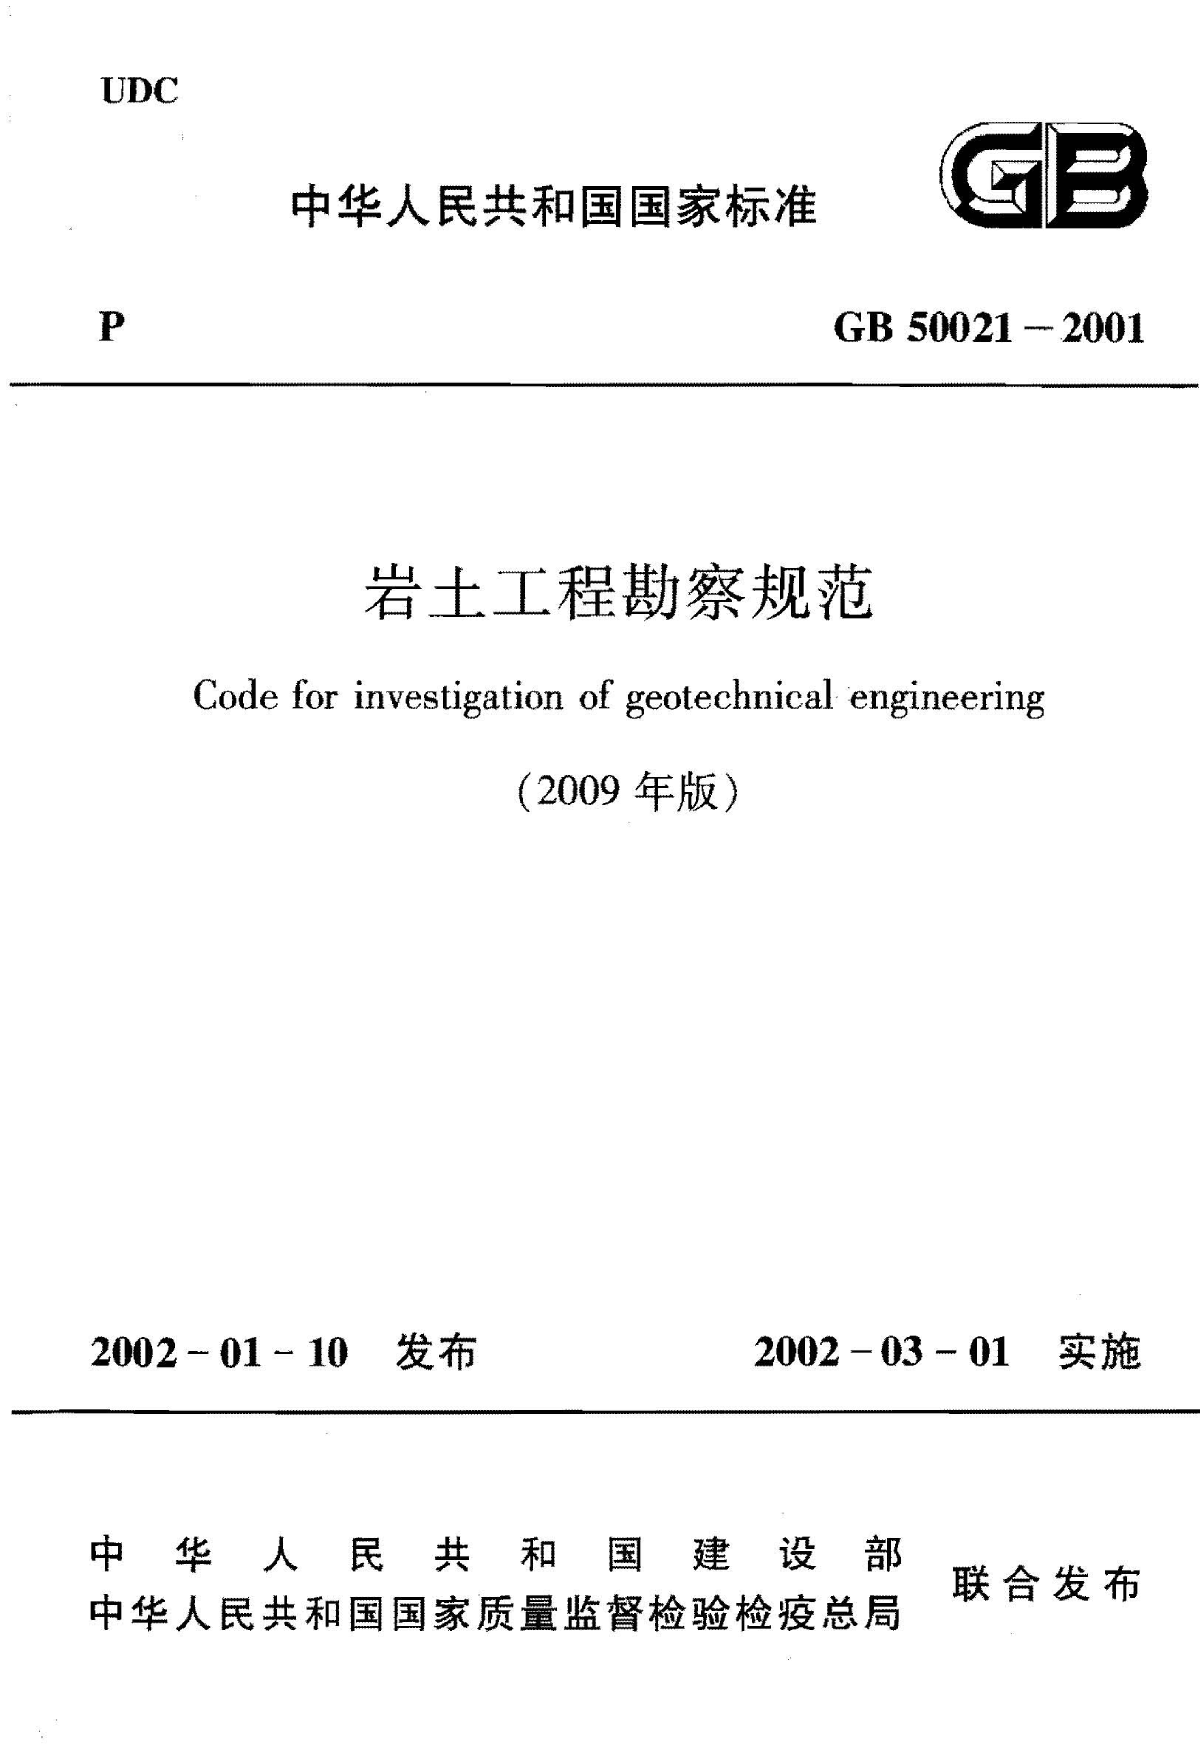  GB 50021-2001 (2009 Edition) Code for Investigation of Geotechnical Engineering - Figure 1